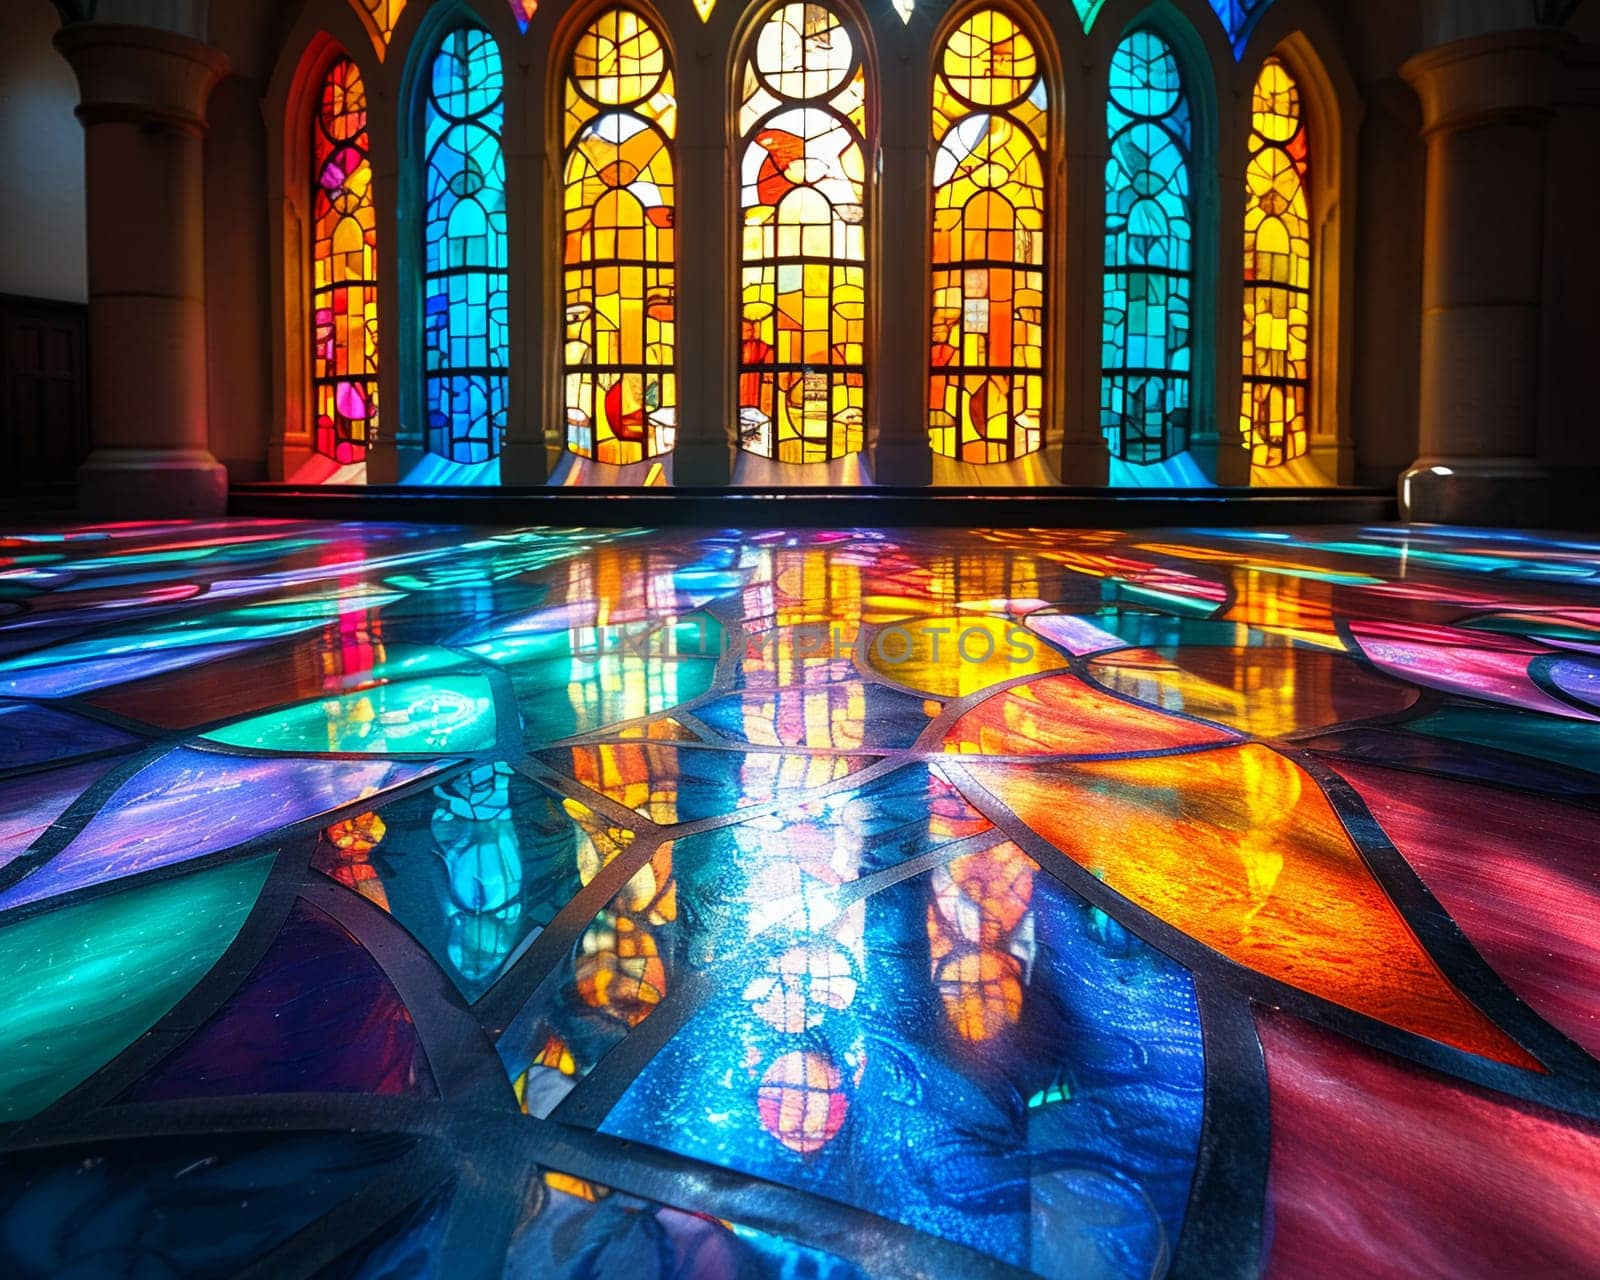 Stained Glass Window Casting Colored Light on a Church Floor, The vibrant hues blend and blur, telling biblical stories in light.